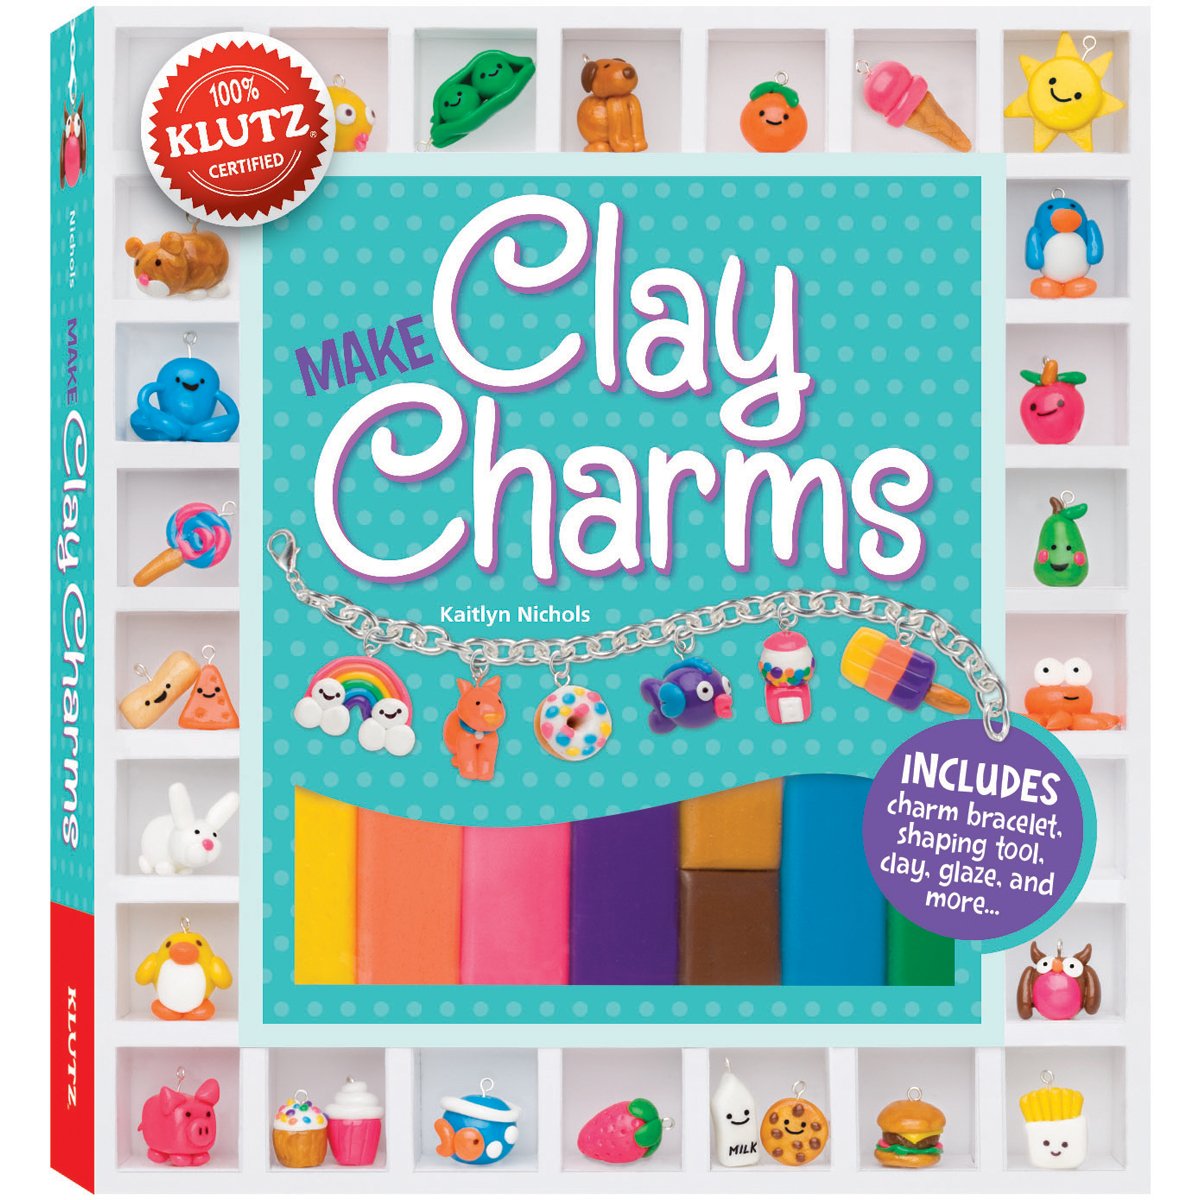 Make Clay Charms (Klutz Craft Kit) 8